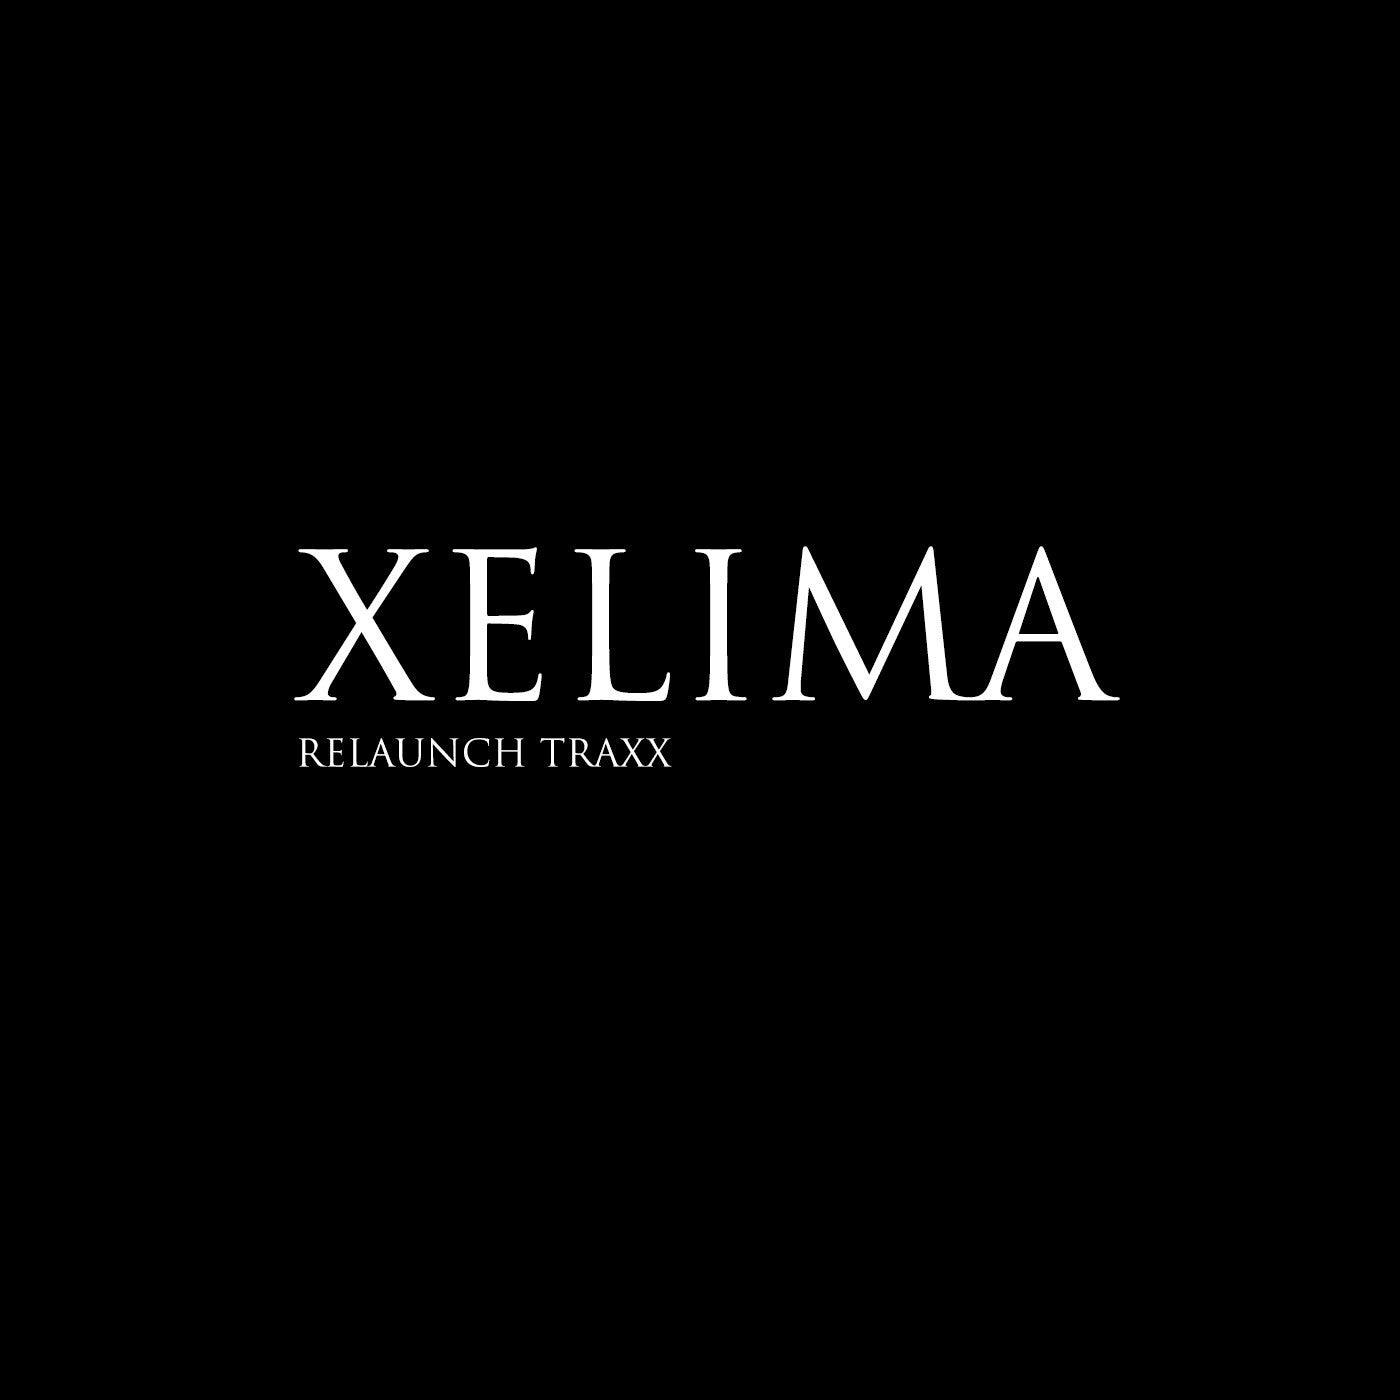 Stream No Ximia music  Listen to songs, albums, playlists for free on  SoundCloud